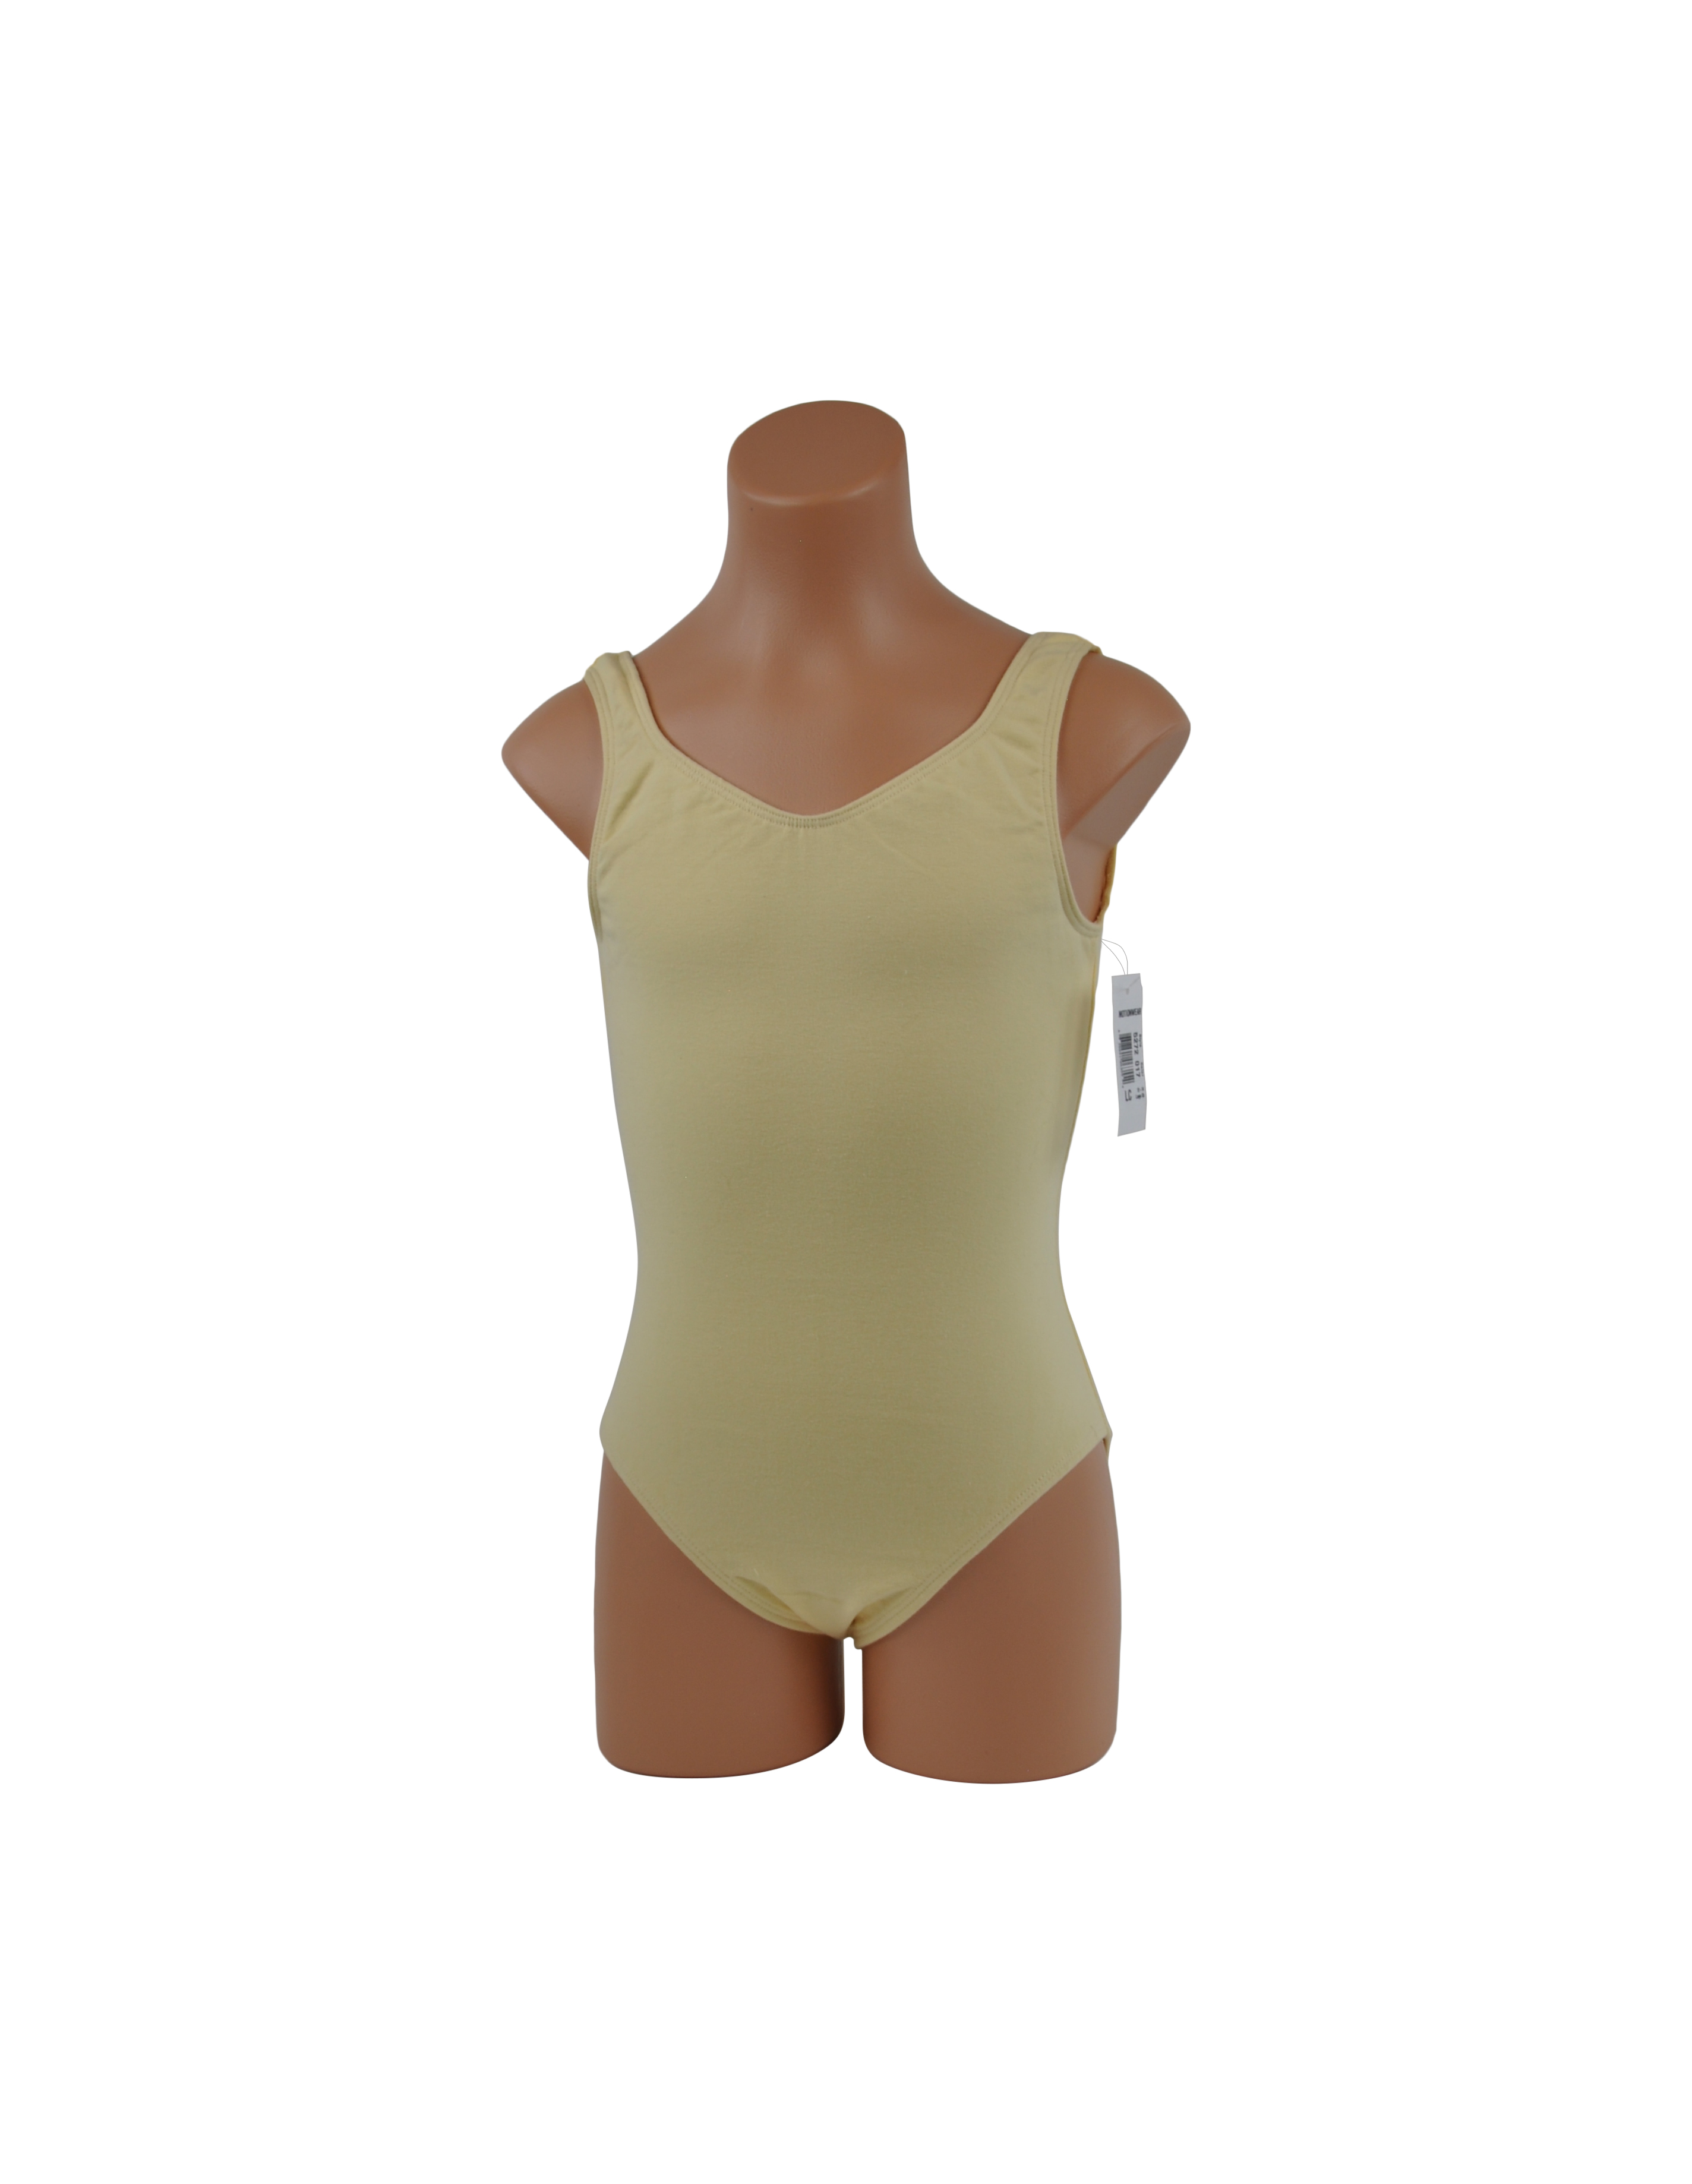 Motionwear Yellow Tank Leotard with Square Back